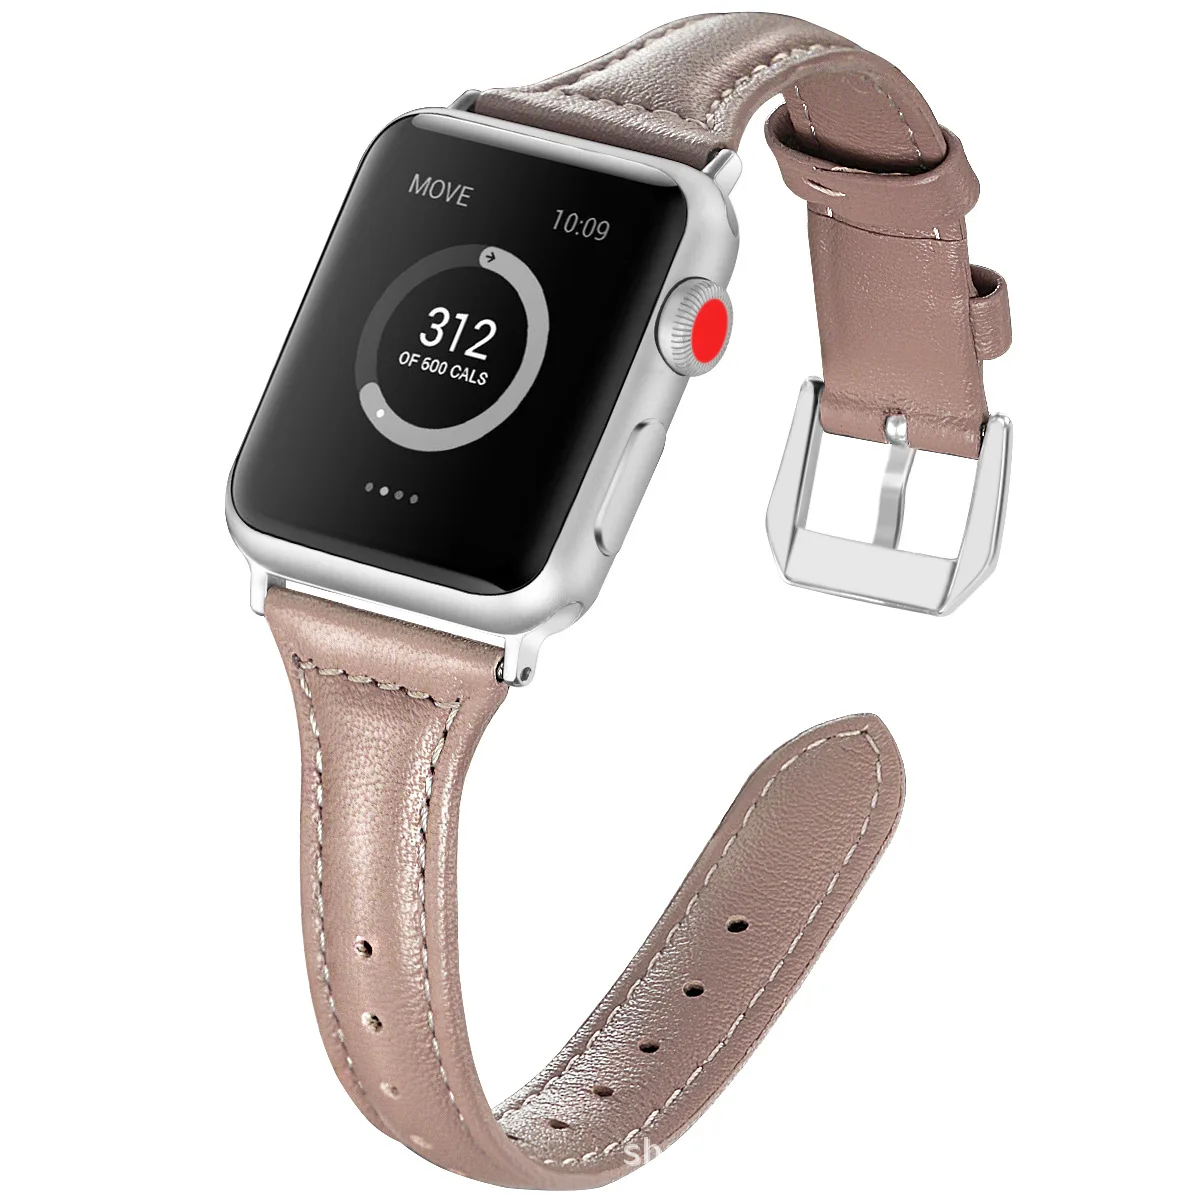 Apple watch small waist leather strap thin strap enlarge